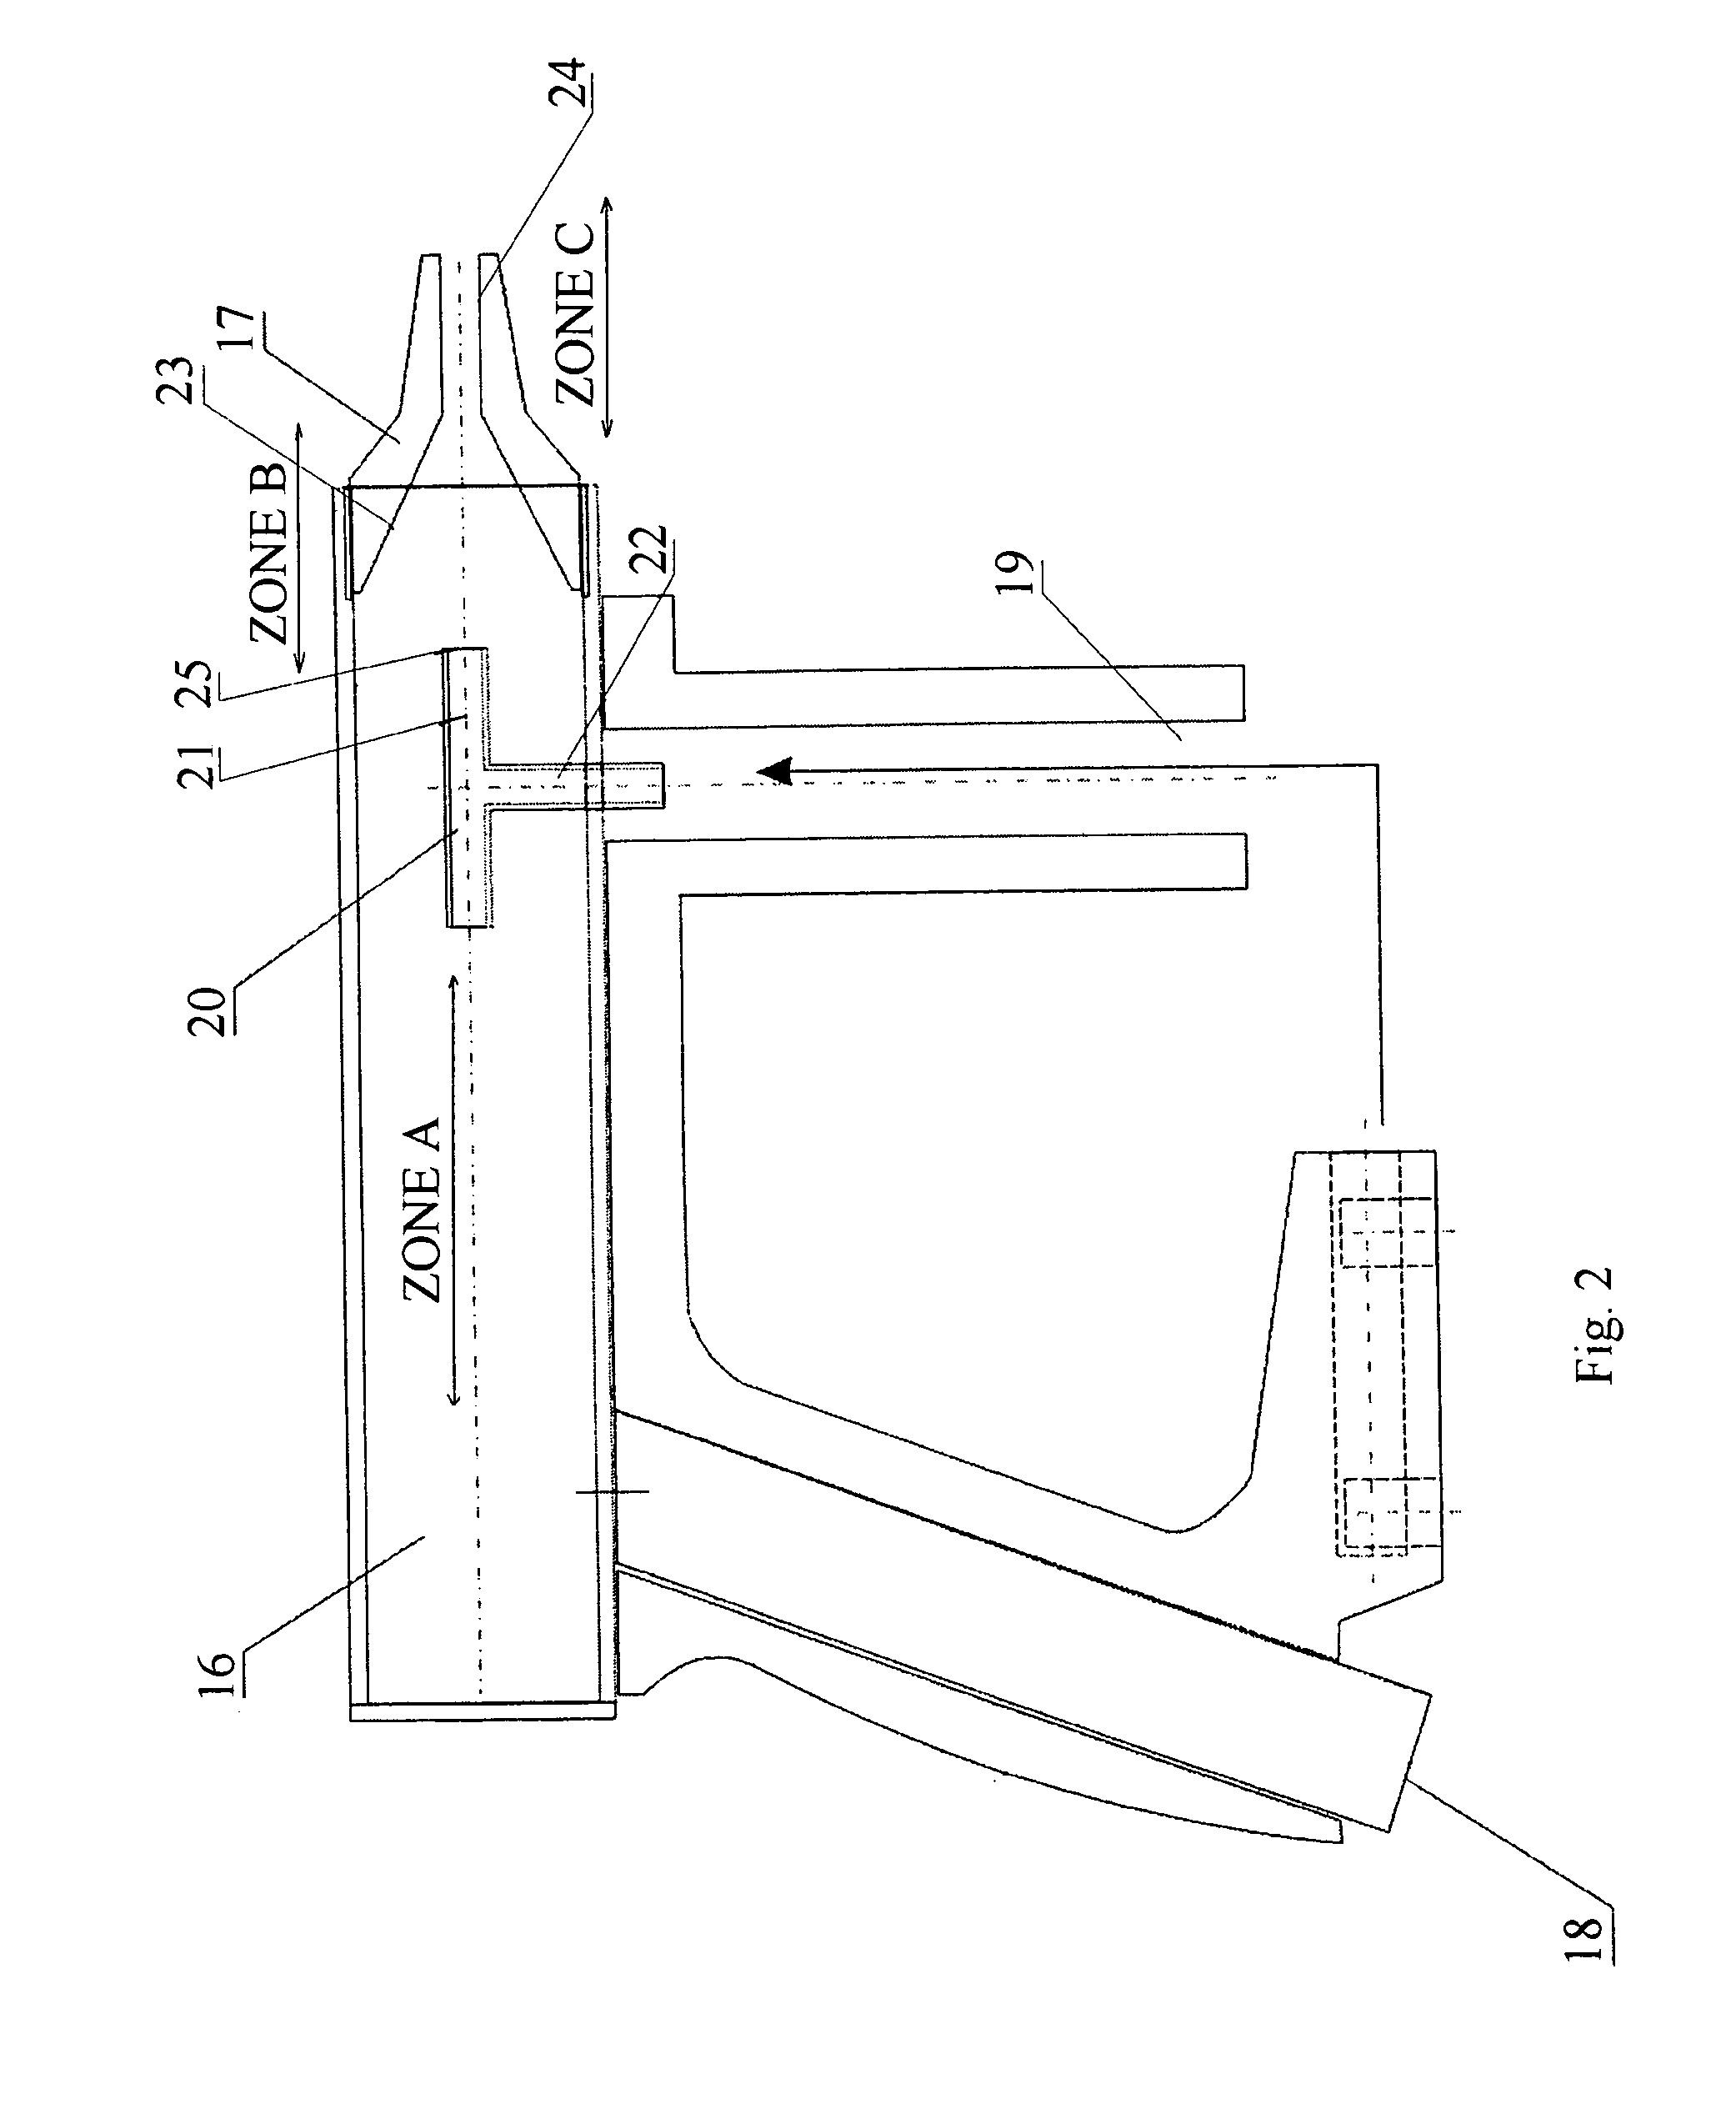 Apparatus for aerohydrodynamic abrasive cleaning of surfaces, sprayer for the same, and method for aerohydrodynamic abrasive cleaning of surfaces